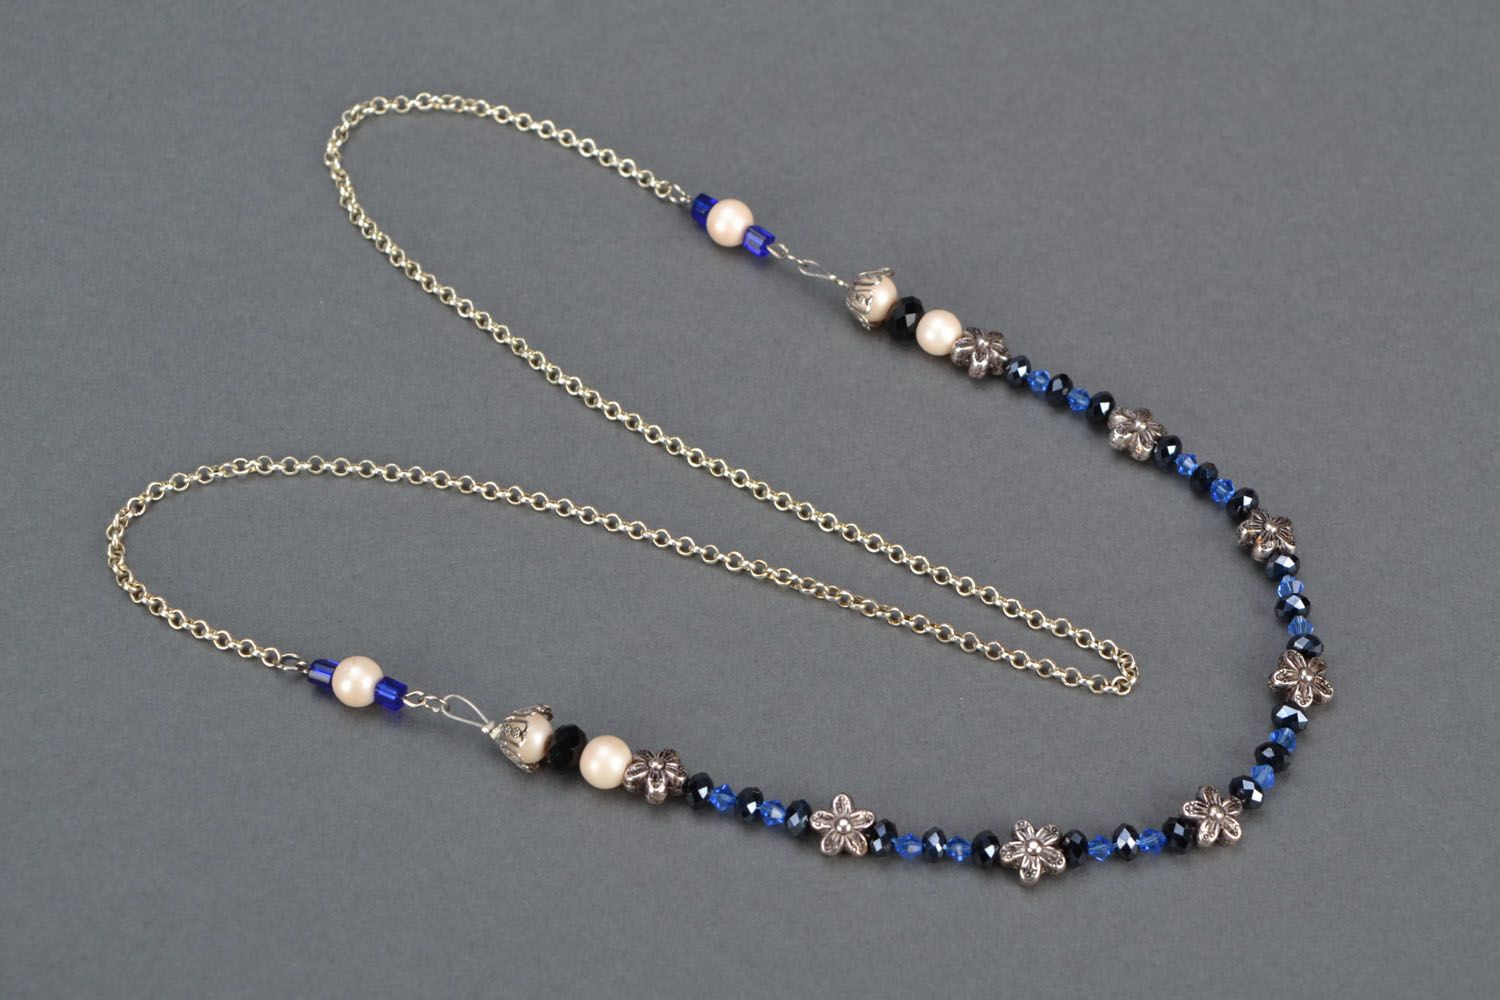 Crystal bead necklace photo 2